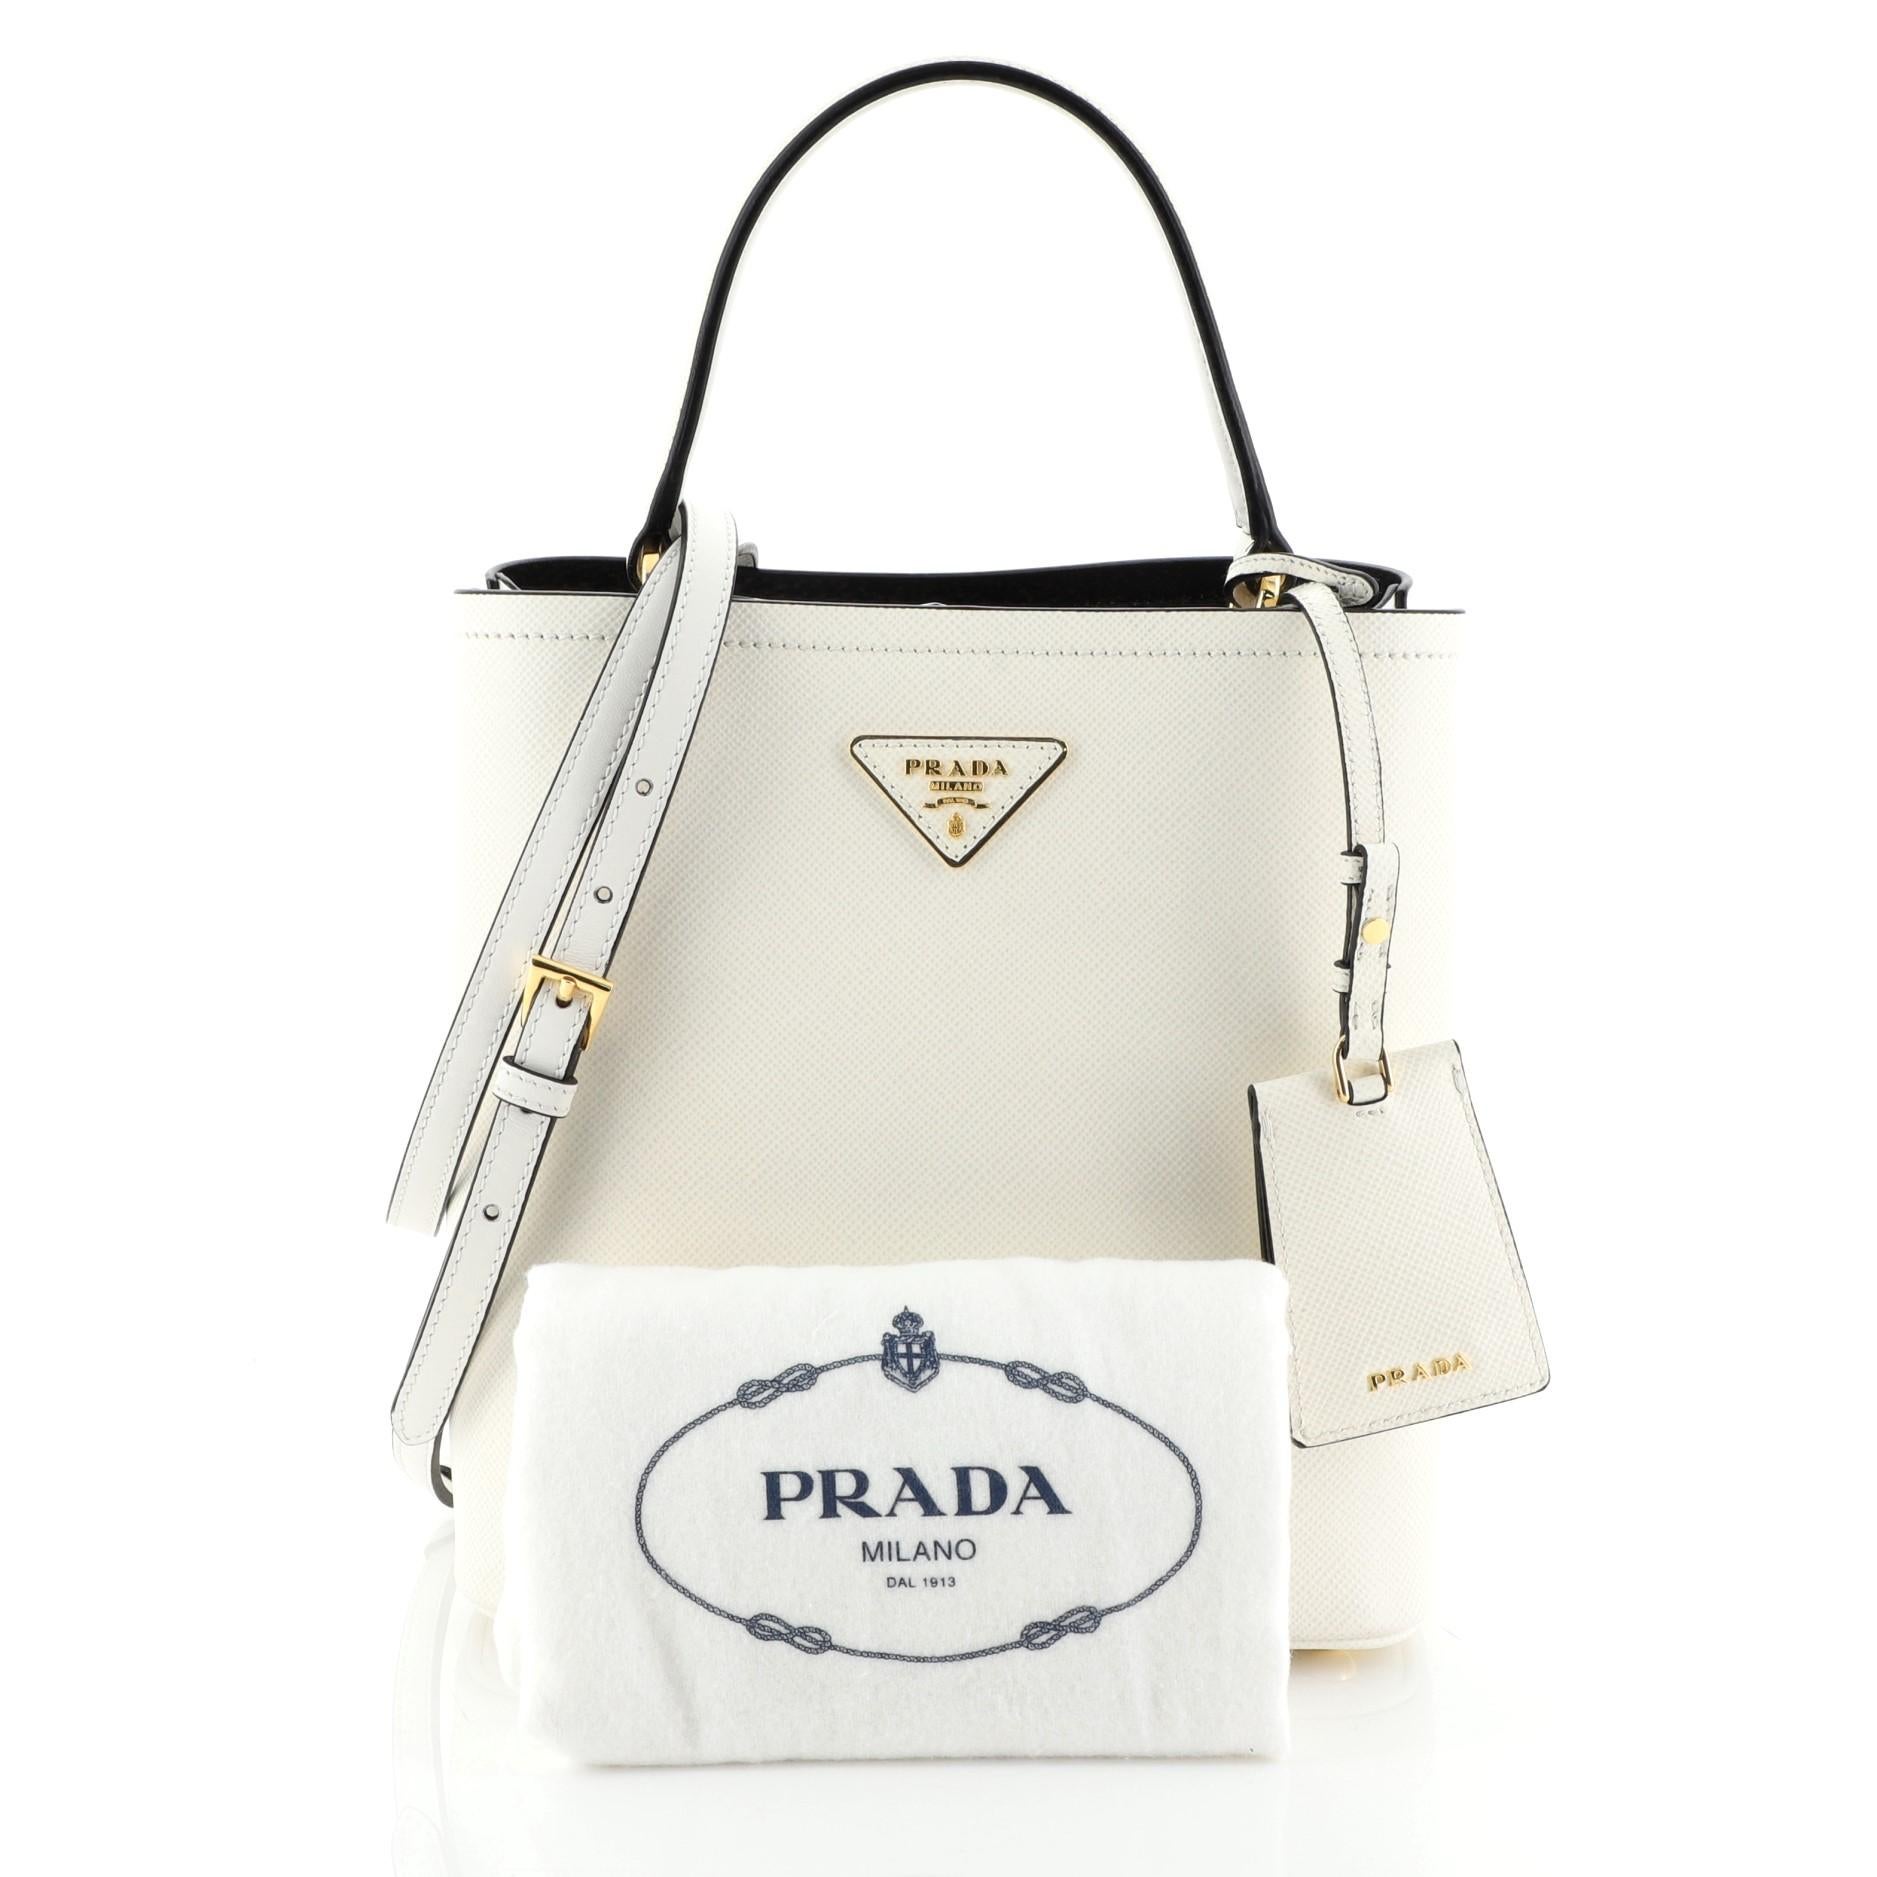 This Prada Panier Bucket Bag Saffiano Leather Medium, crafted in white leather, features a leather top handle and gold- tone hardware. Its wide open top showcases a black leather interior divided into two compartments. 


Estimated Retail Price: